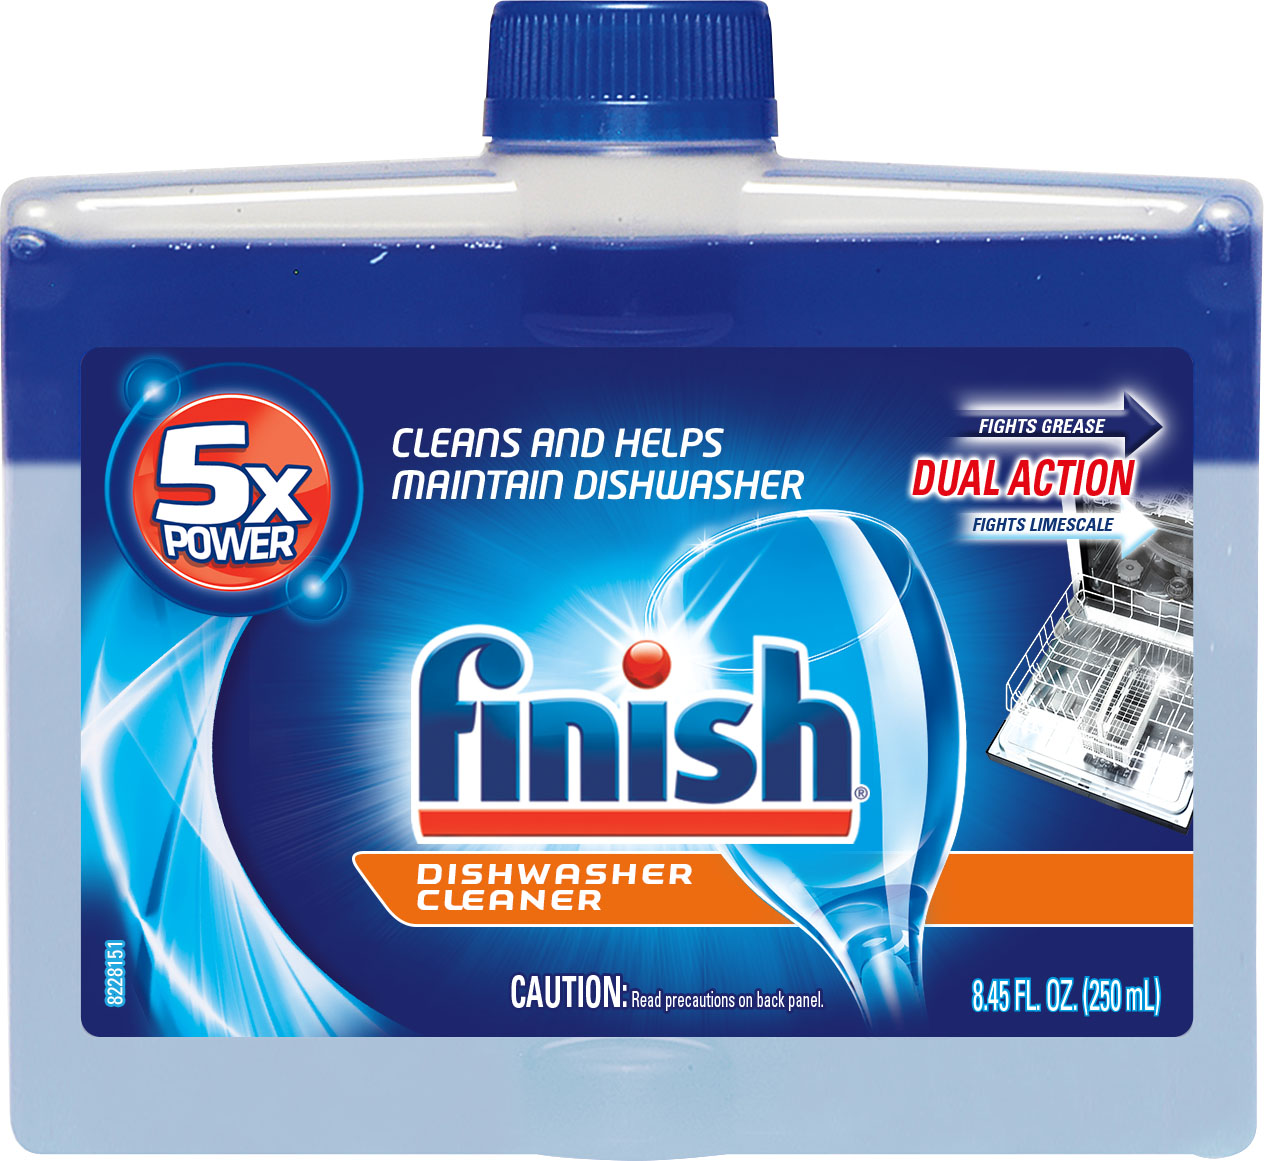 FINISH Dishwasher Cleaner  Dual Action Discontinued June 11 2021